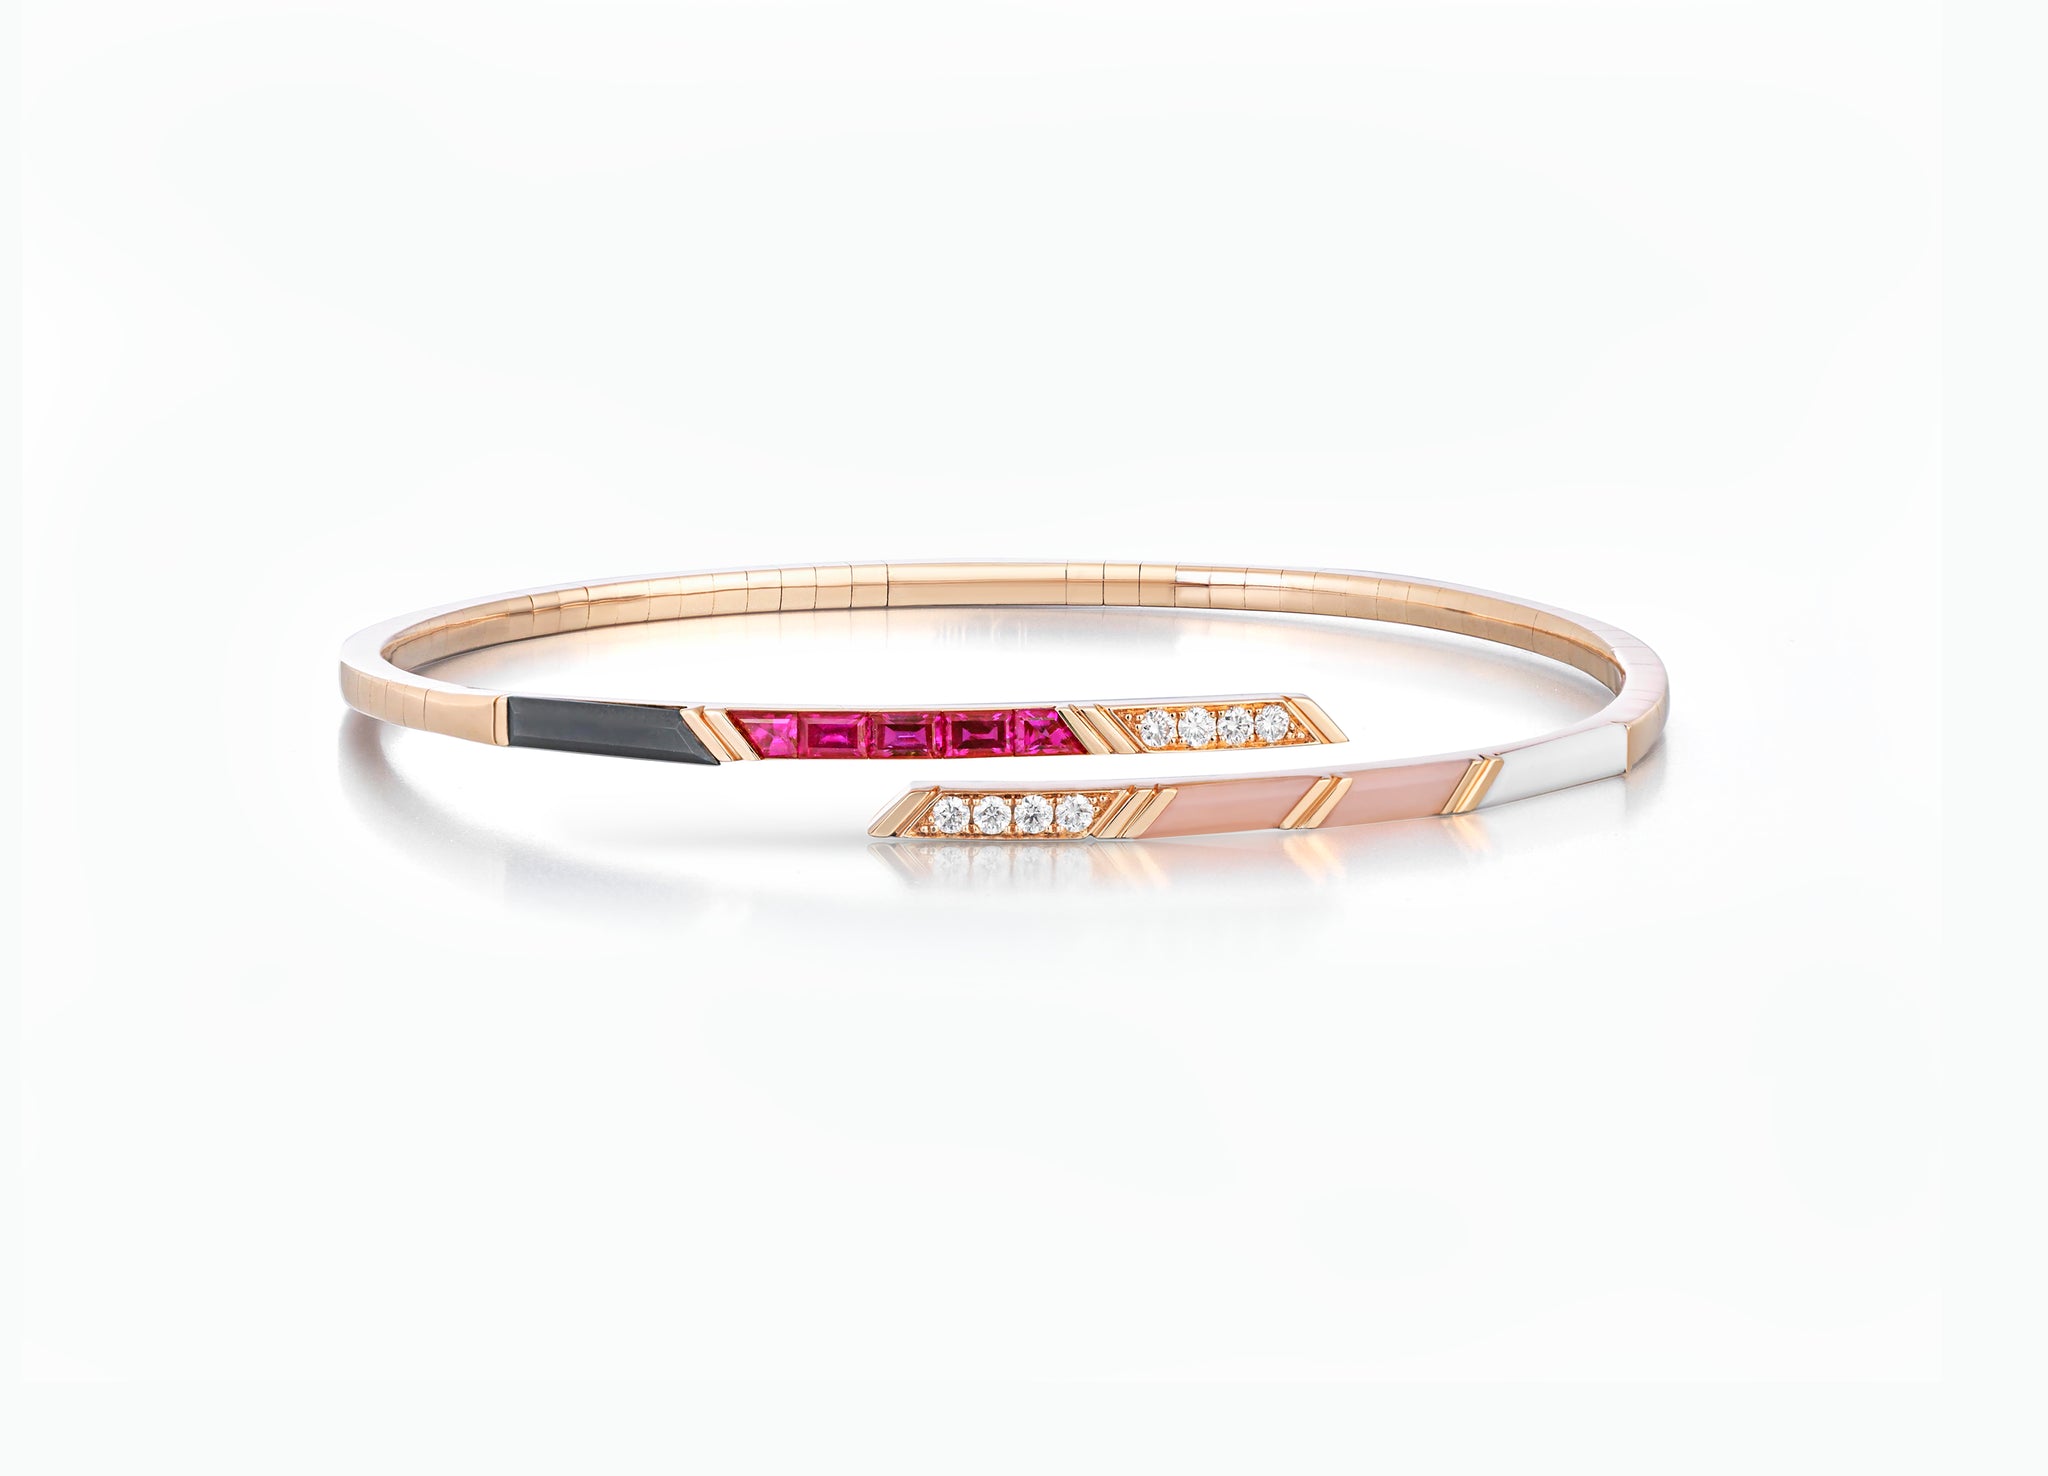 Ruby diamond and pink opal bangle in 18K rose gold by Tomasz Donocik front view